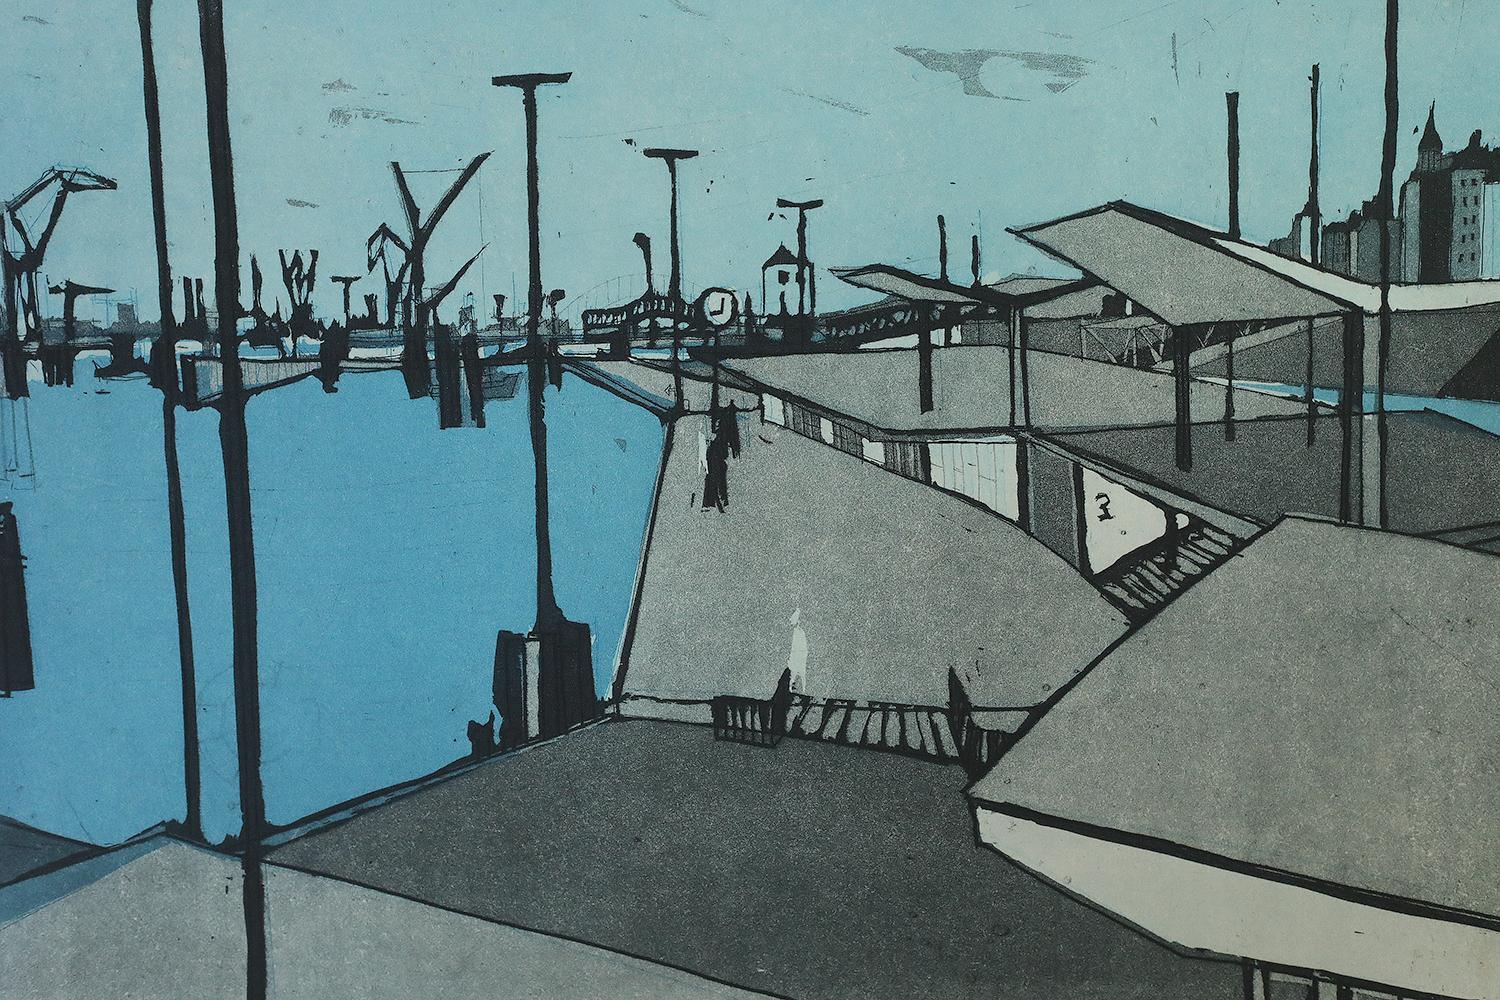 Otto Eglau, Im Hafen, 1961
Etching
Test print
The work signed by the artist's signature. Has title and date.
Dimensions 47/60
Unframed work

Otto Eglau (1917 - 1988) was a German artist whose graphics often depict abstract seascapes, power lines